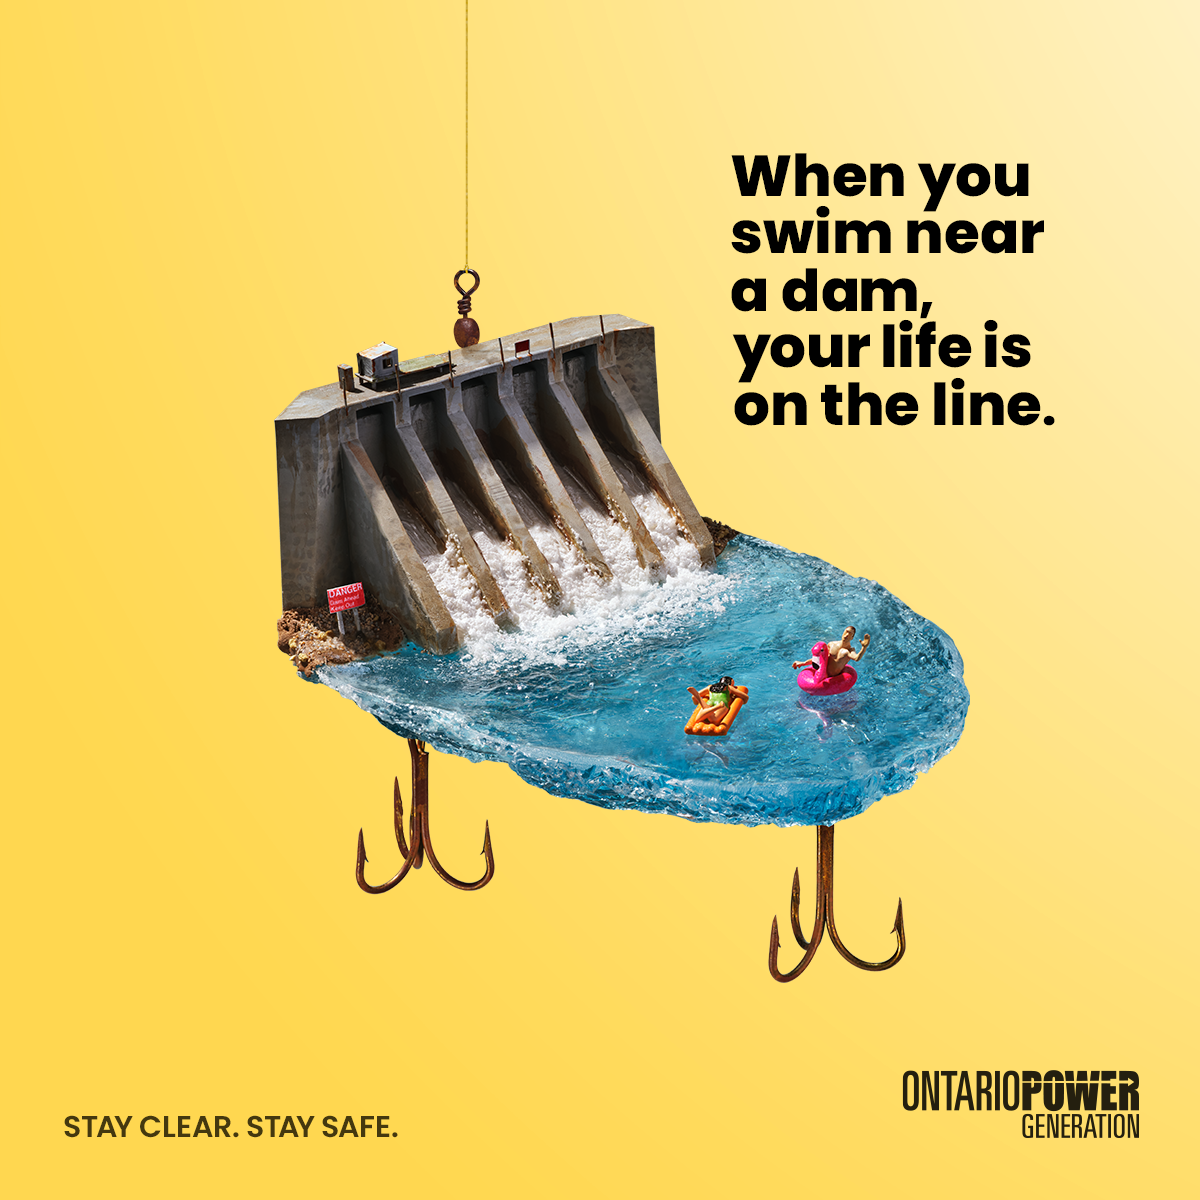 When you swim near a dam, your life is on the line.